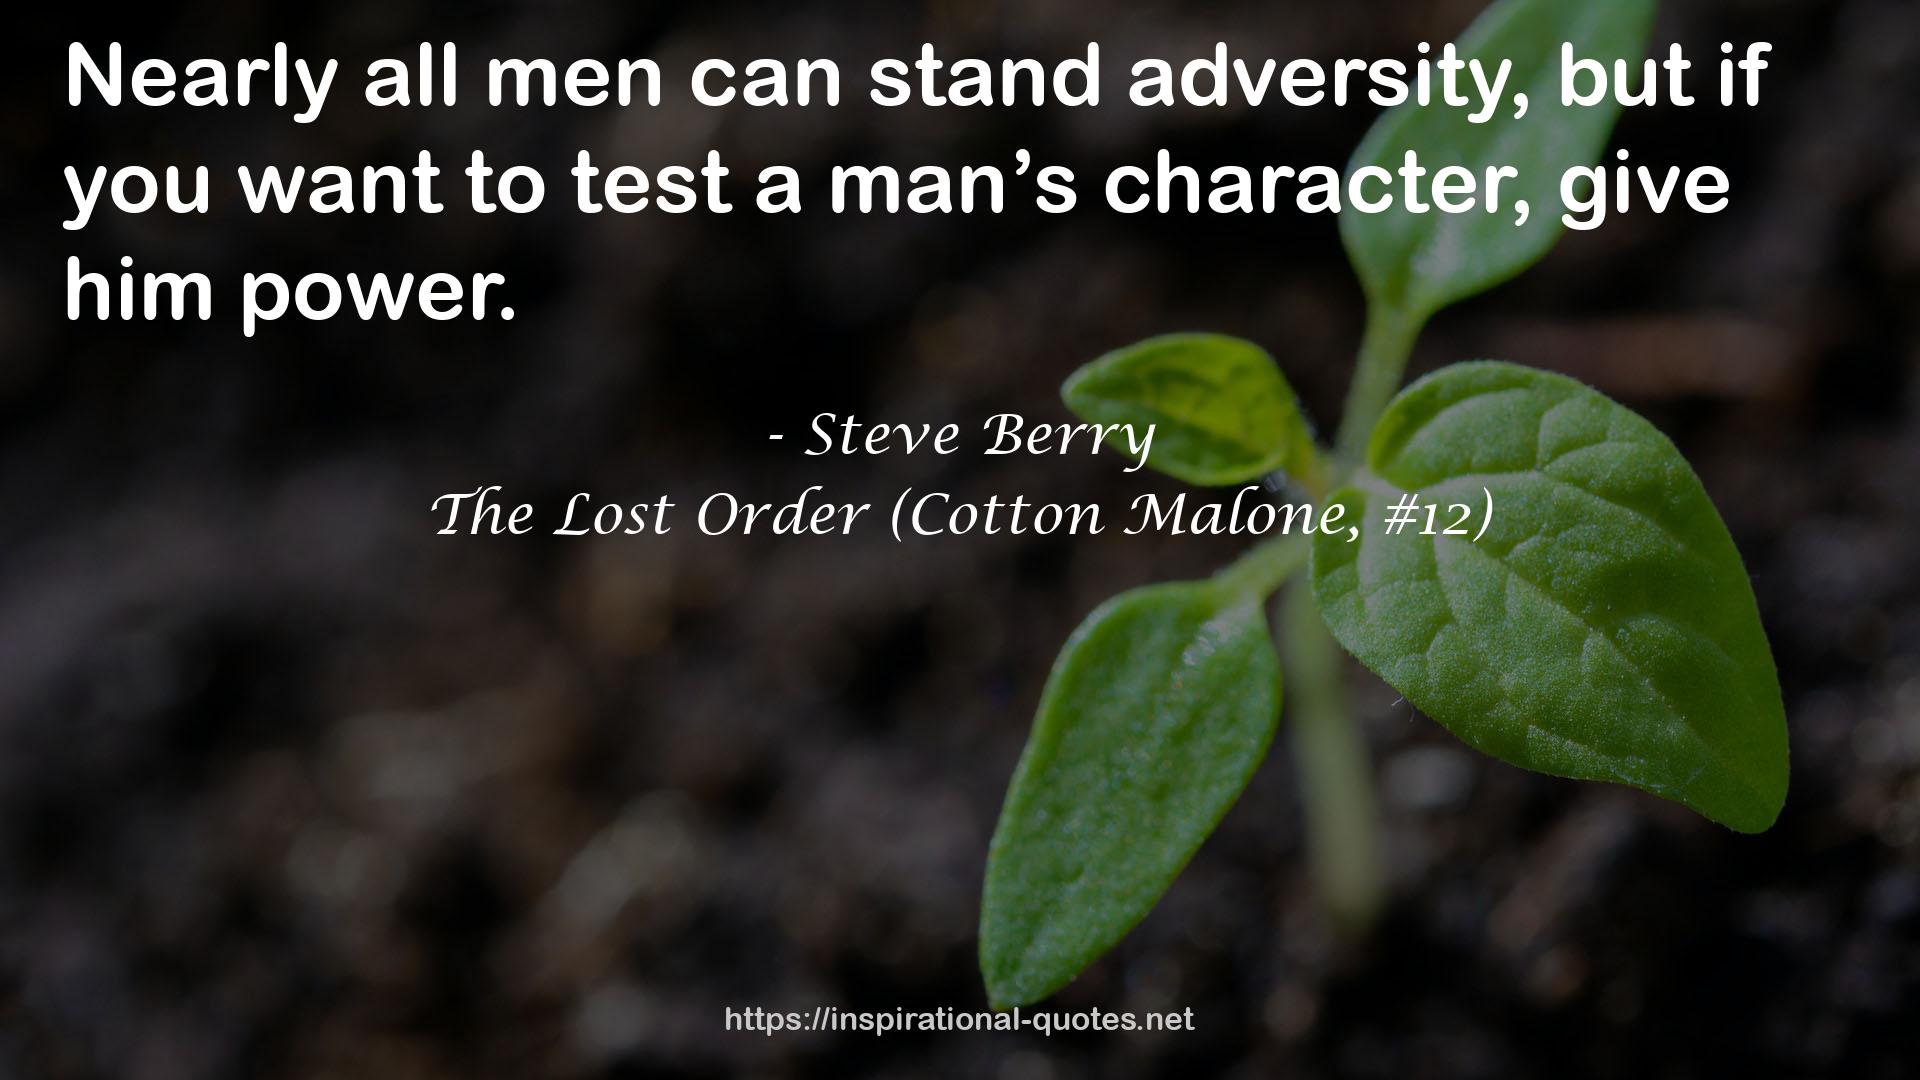 The Lost Order (Cotton Malone, #12) QUOTES